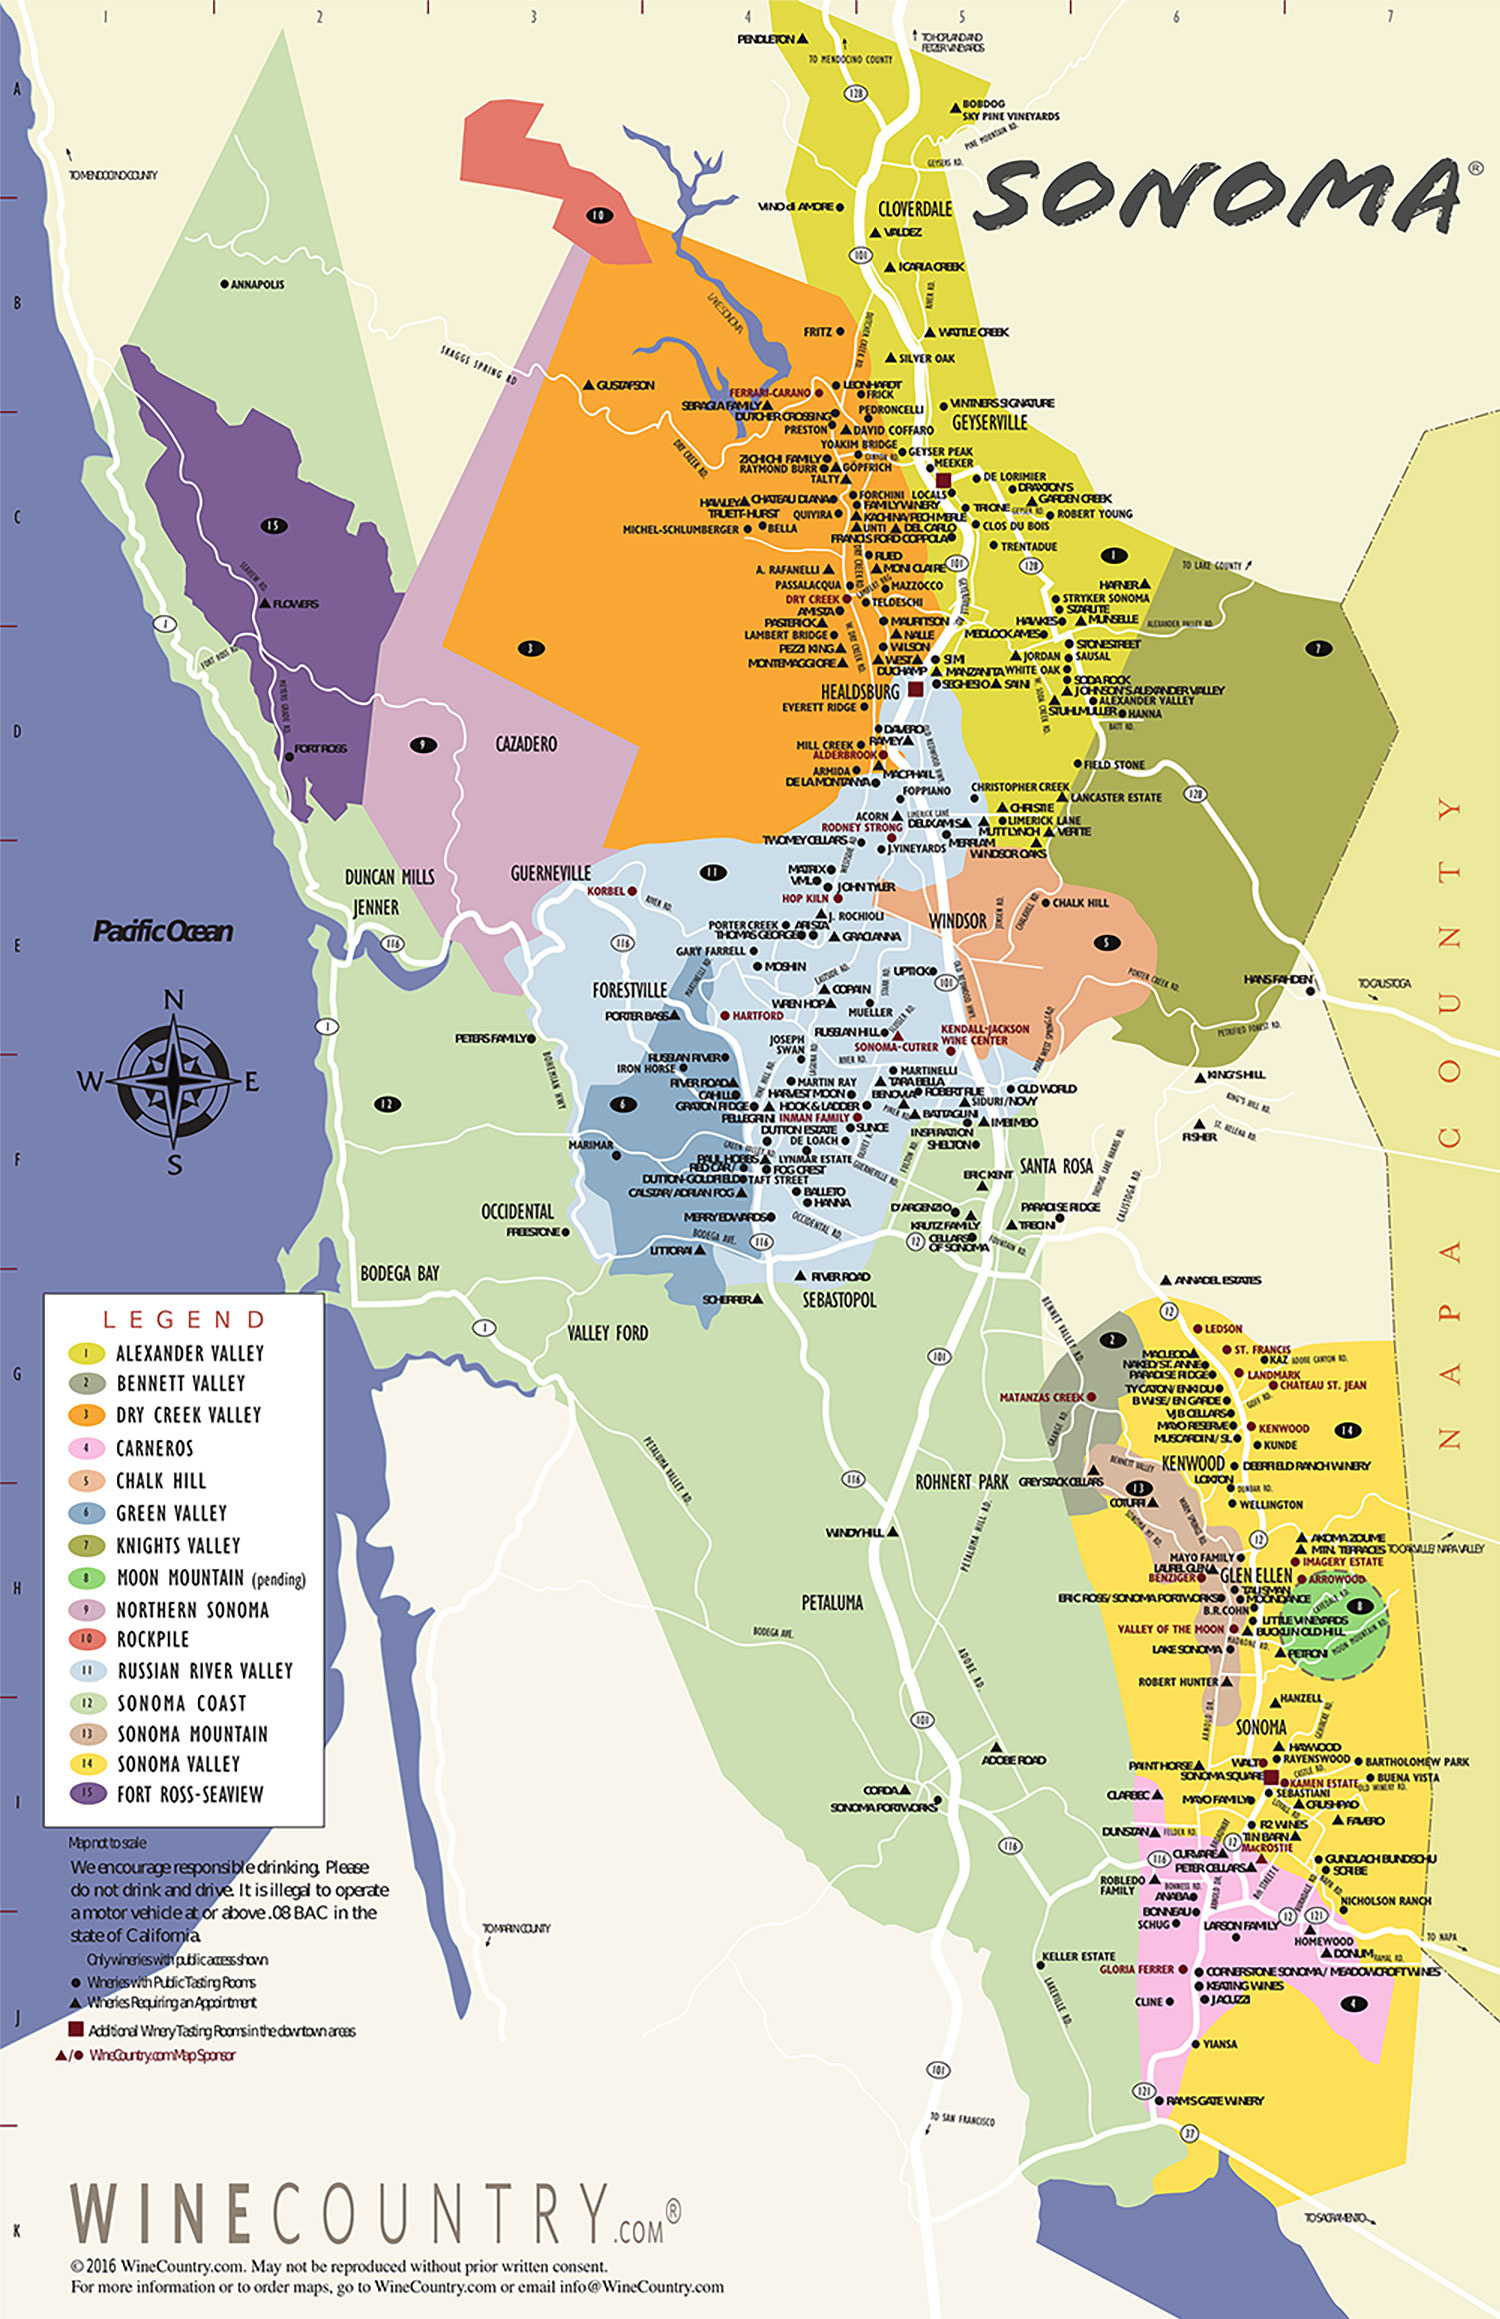 Sonoma County Wine Country Maps - Sonoma - Central California Wine Country Map